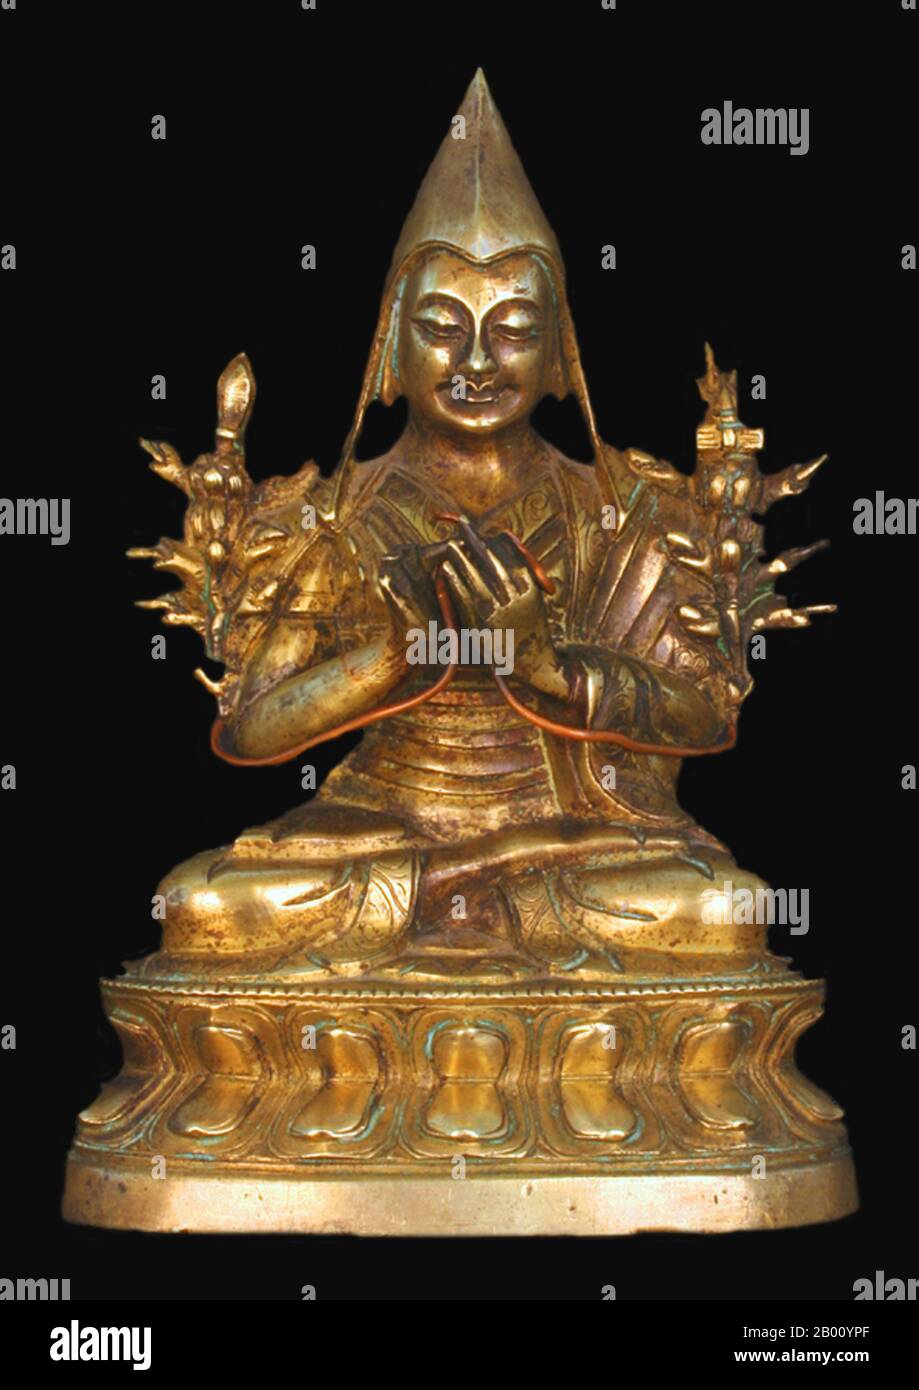 Mongolia: Bronze image of Tsongkhapa, known and revered by Mongolian Buddhists as Bogd Zonkhov. Tibetan Museum Society (CC BY-SA 2.5 License).  Tsongkhapa (1357–1419) was a famous teacher of Tibetan Buddhism whose activities led to the formation of the Gelug school. He is also known by his ordained name Lobsang Drakpa (blo bzang grags pa) or simply as Je Rinpoche (rje rin po che). Tsongkhapa heard Buddha’s teachings from masters of all Tibetan Buddhist traditions, and received lineages transmitted in the major schools. His main source of inspiration was the Kadampa tradition. Stock Photo